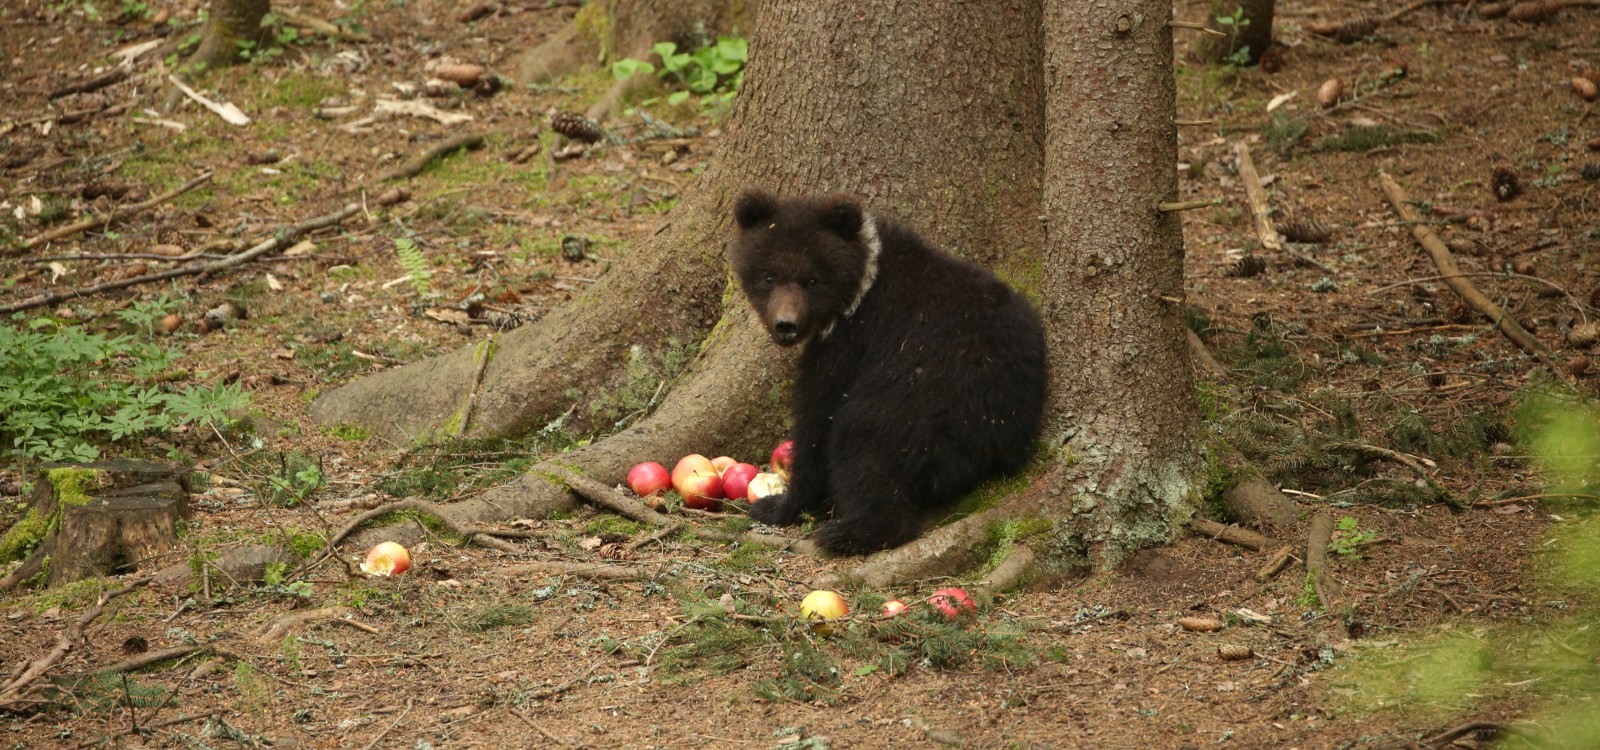 A brown bear cub is sitting in a forest surrounded by trees and grass. By her front paws is a pile of red and green apples.